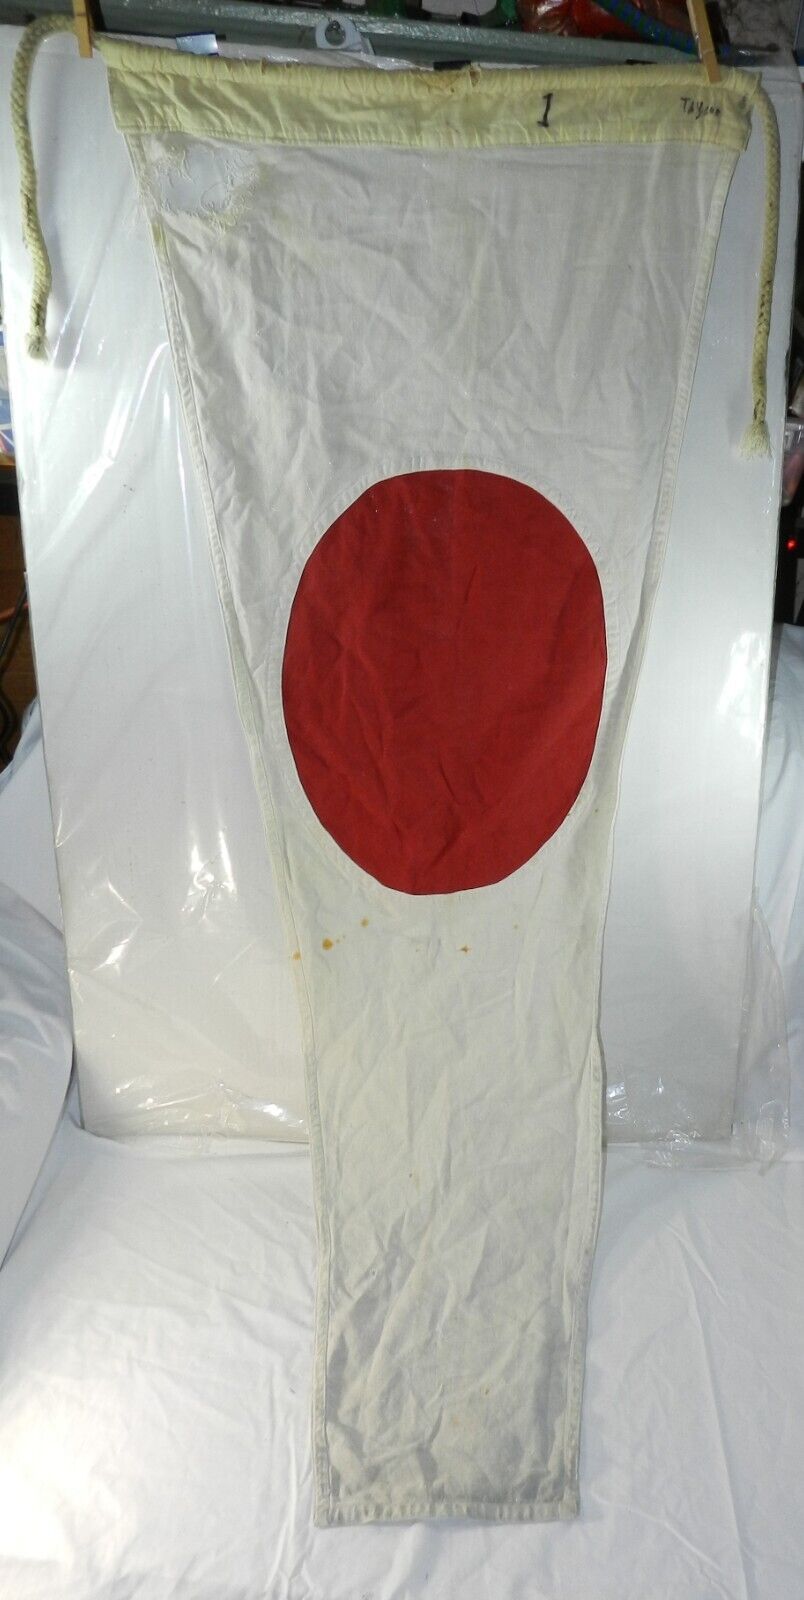 Vintage Naval Signal Flag for the number 1 - WWII ?